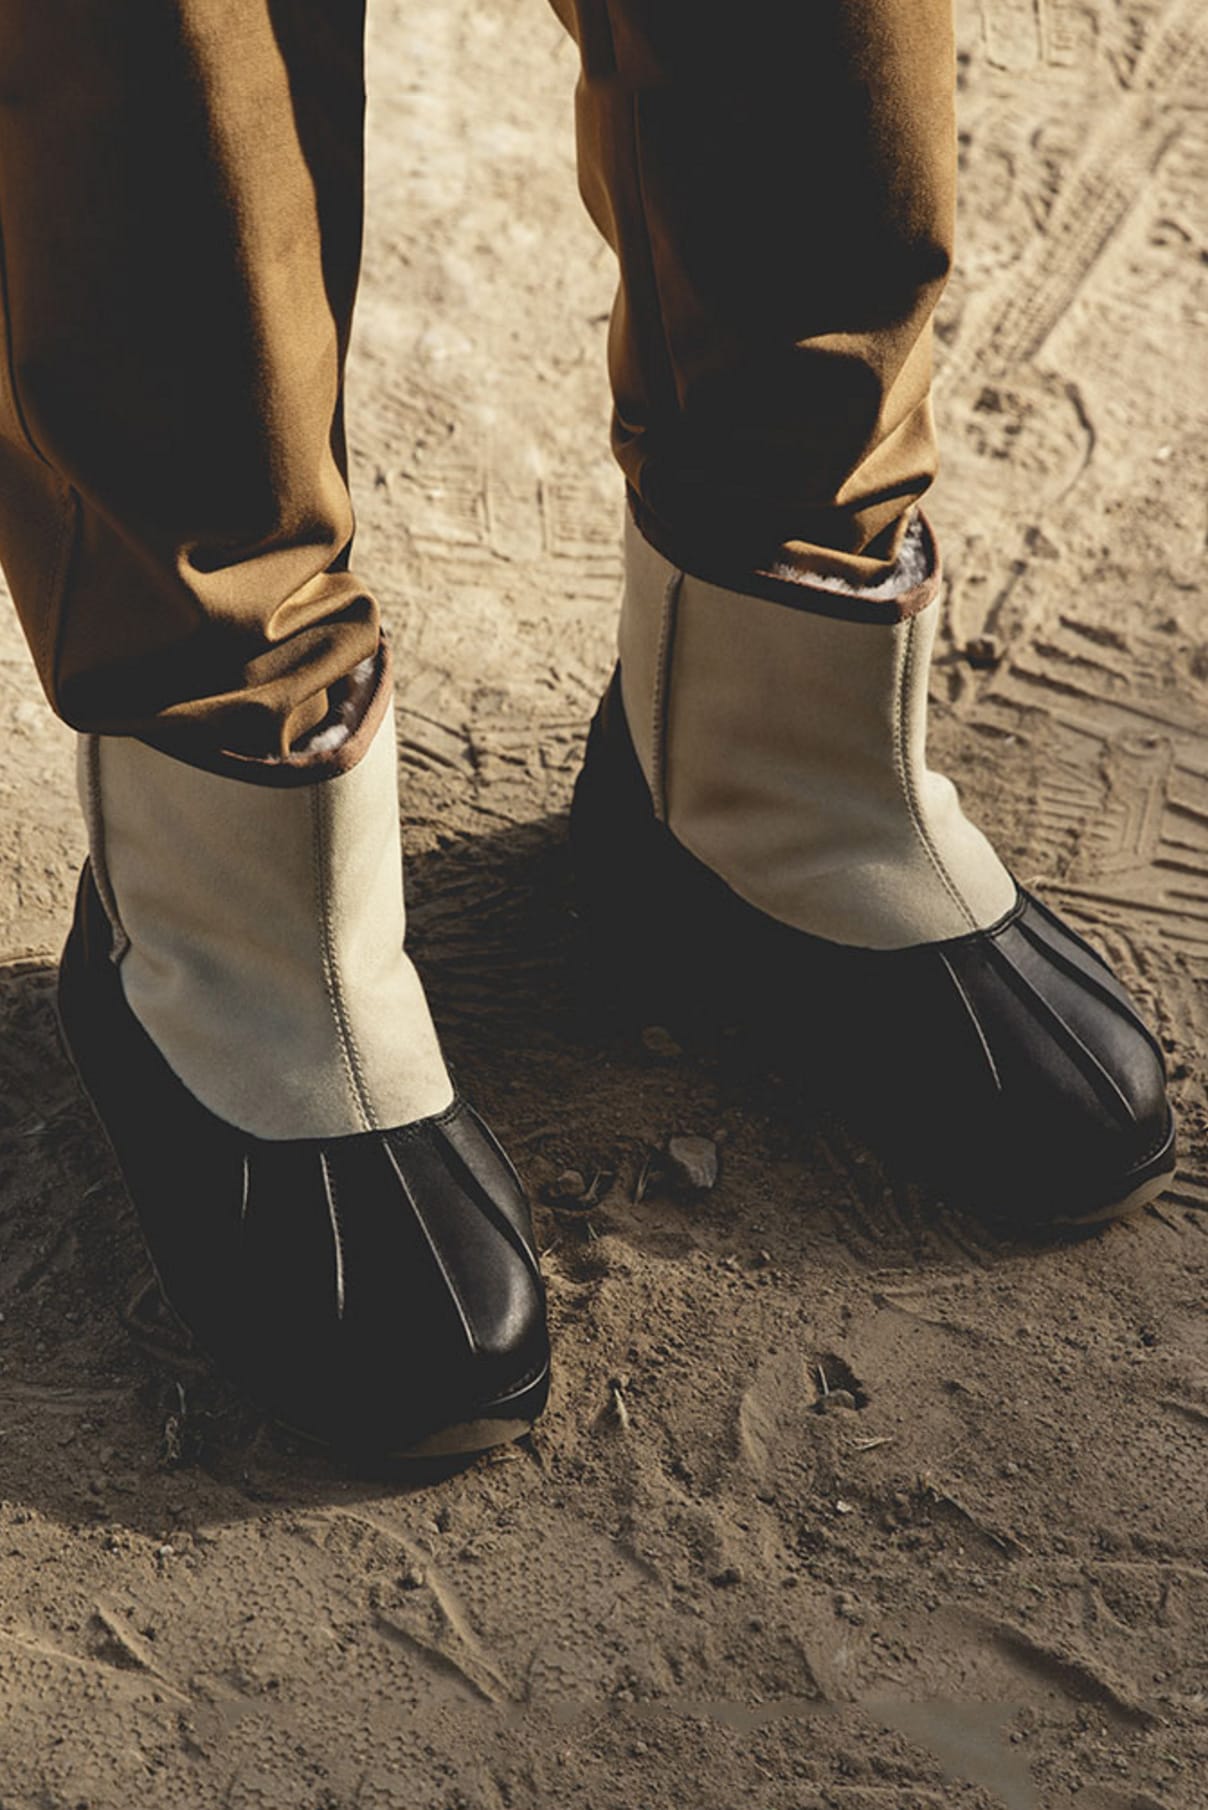 UGG x 3.1 Phillip Lim Boots Now 